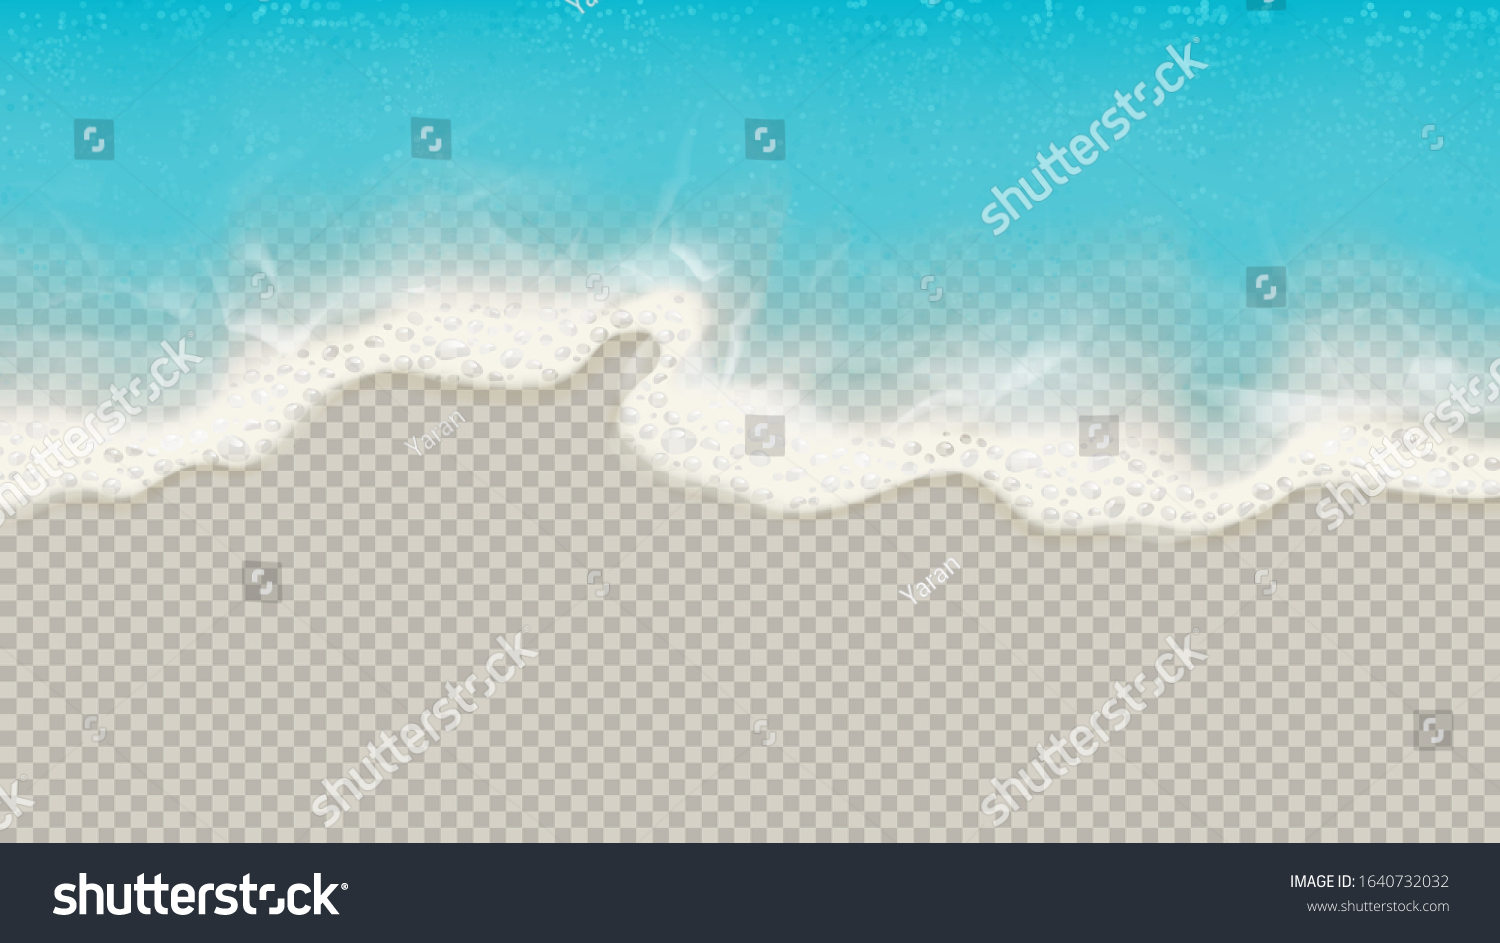 Top view of sea waves isolated on transparent background. Vector illustration with aerial view on realistic ocean or sea waves with foam. #1640732032